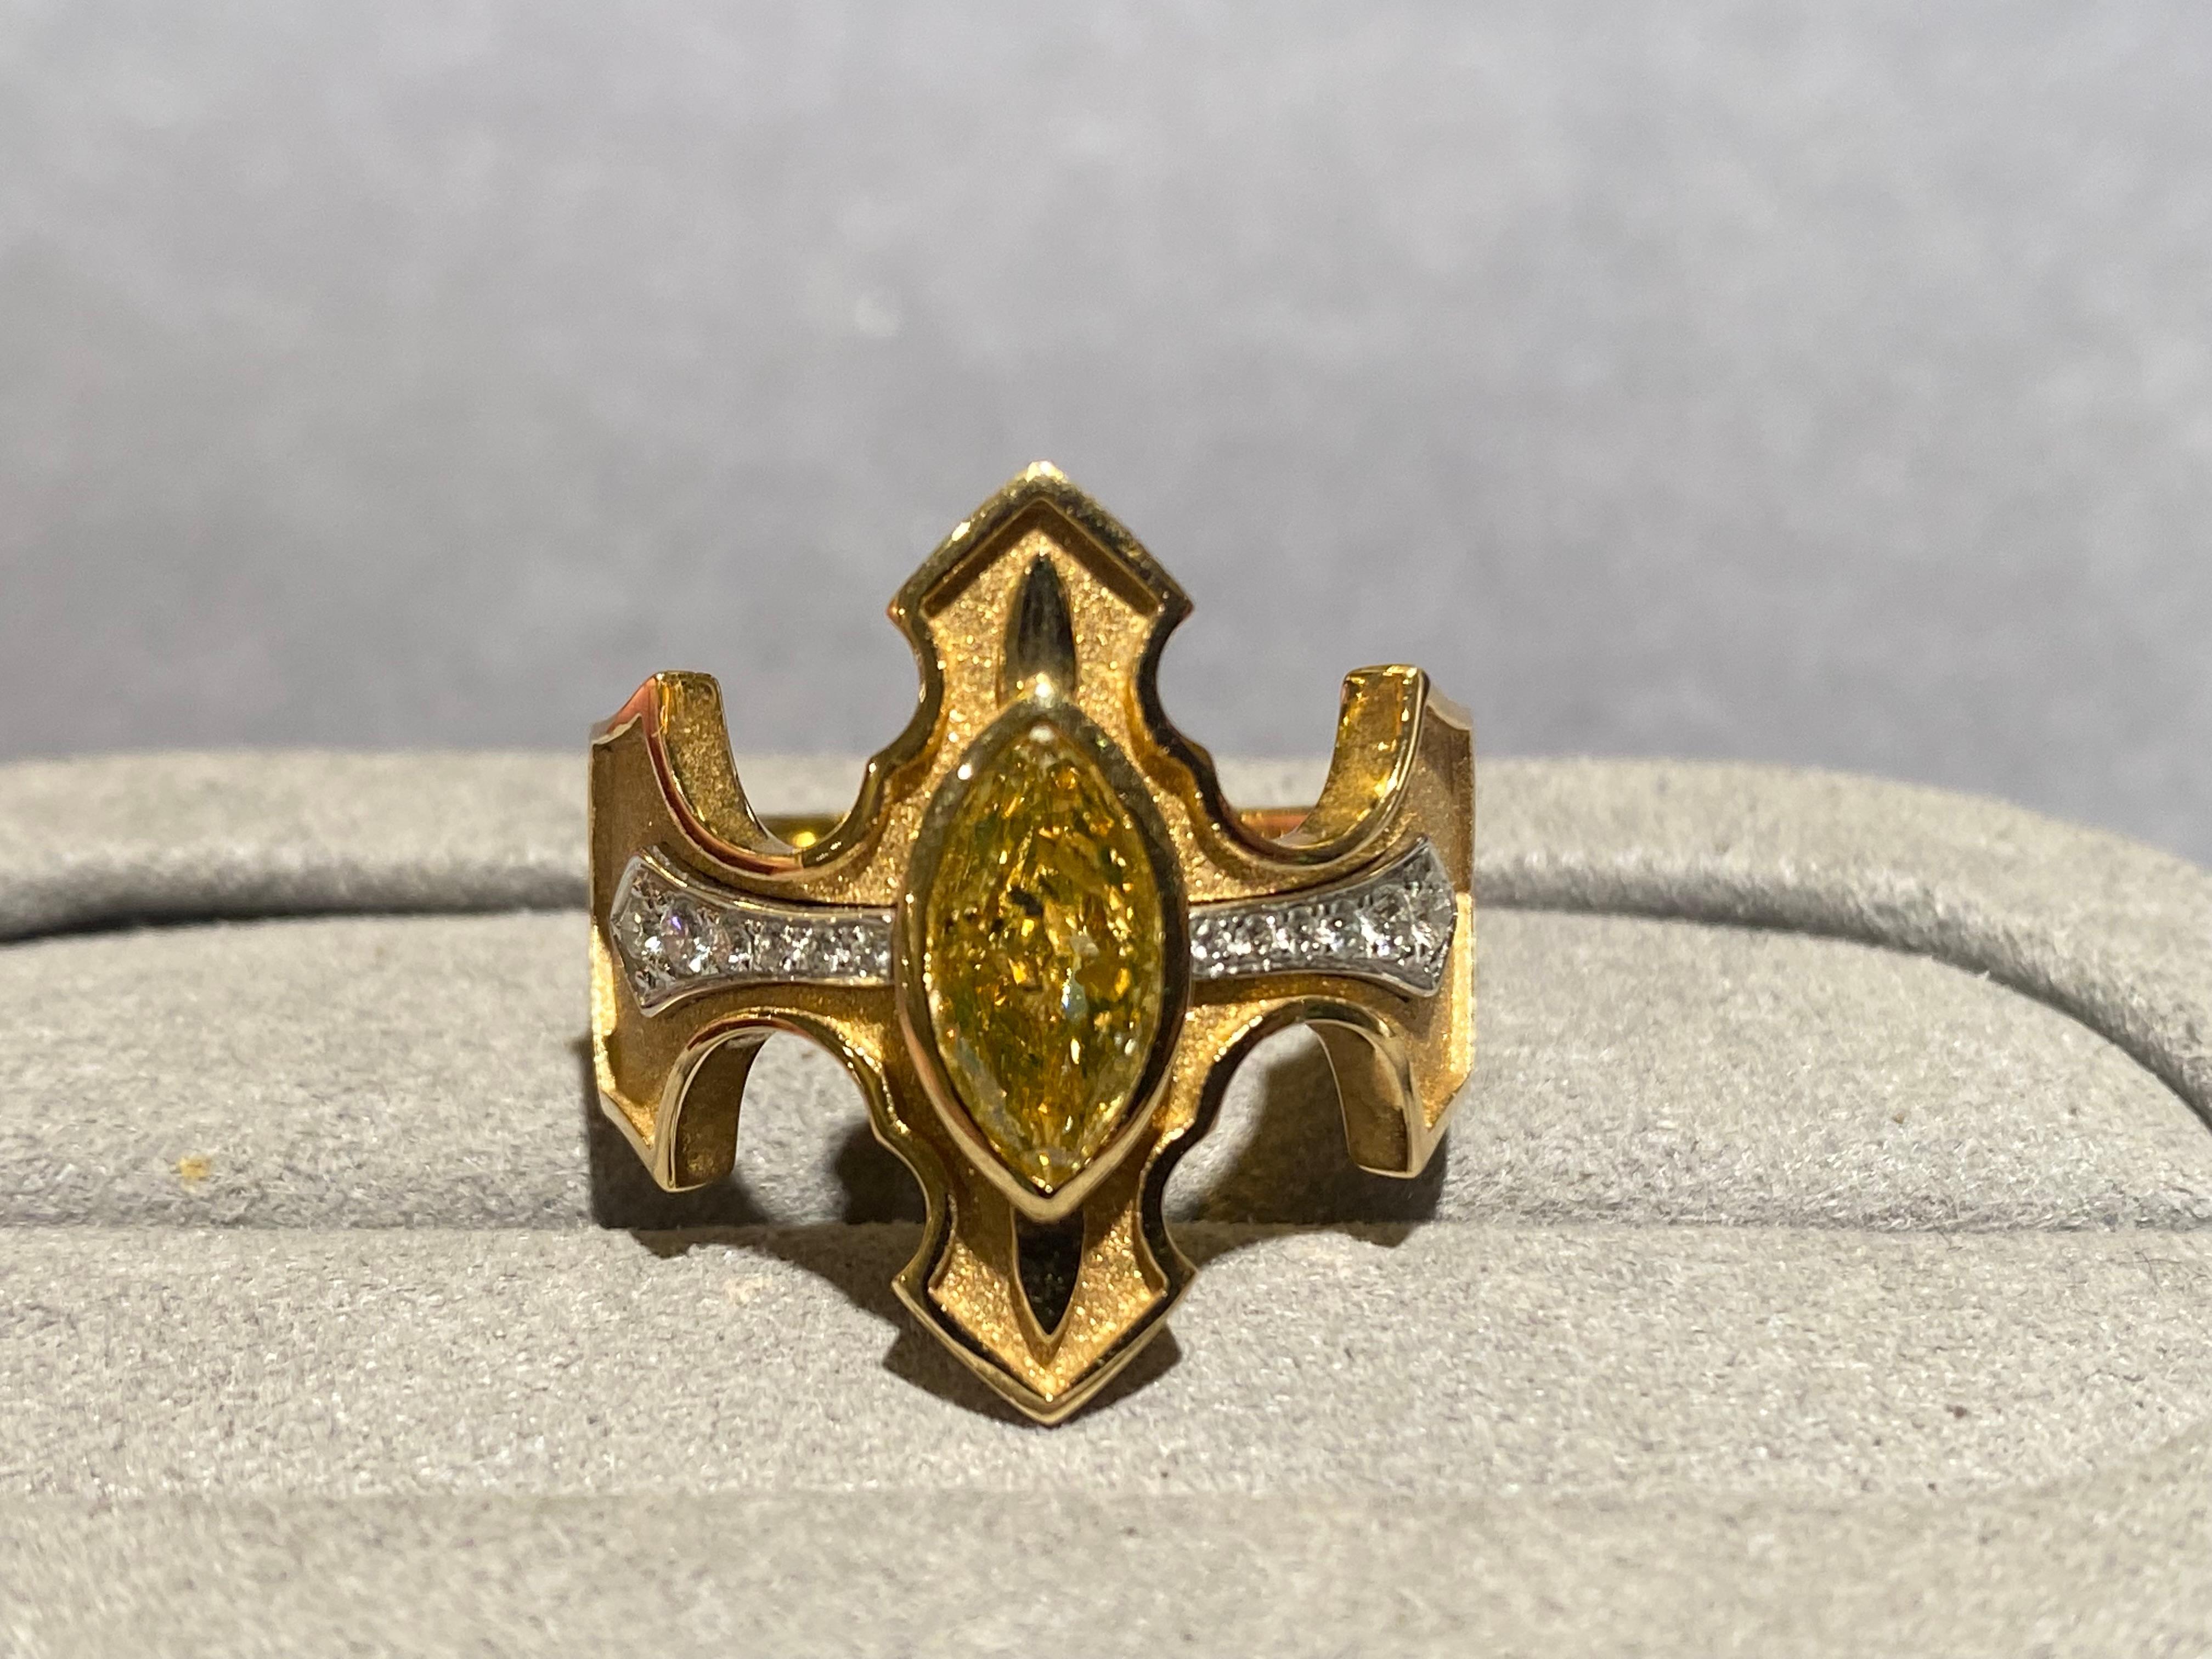 A marquise yellow diamond and diamond ring in 18k yellow gold. The yellow diamond is set in the middle of a crown like motif. The are graduating white diamond set beside the yellow diamond running along the horizontal axis of the ring. The ring